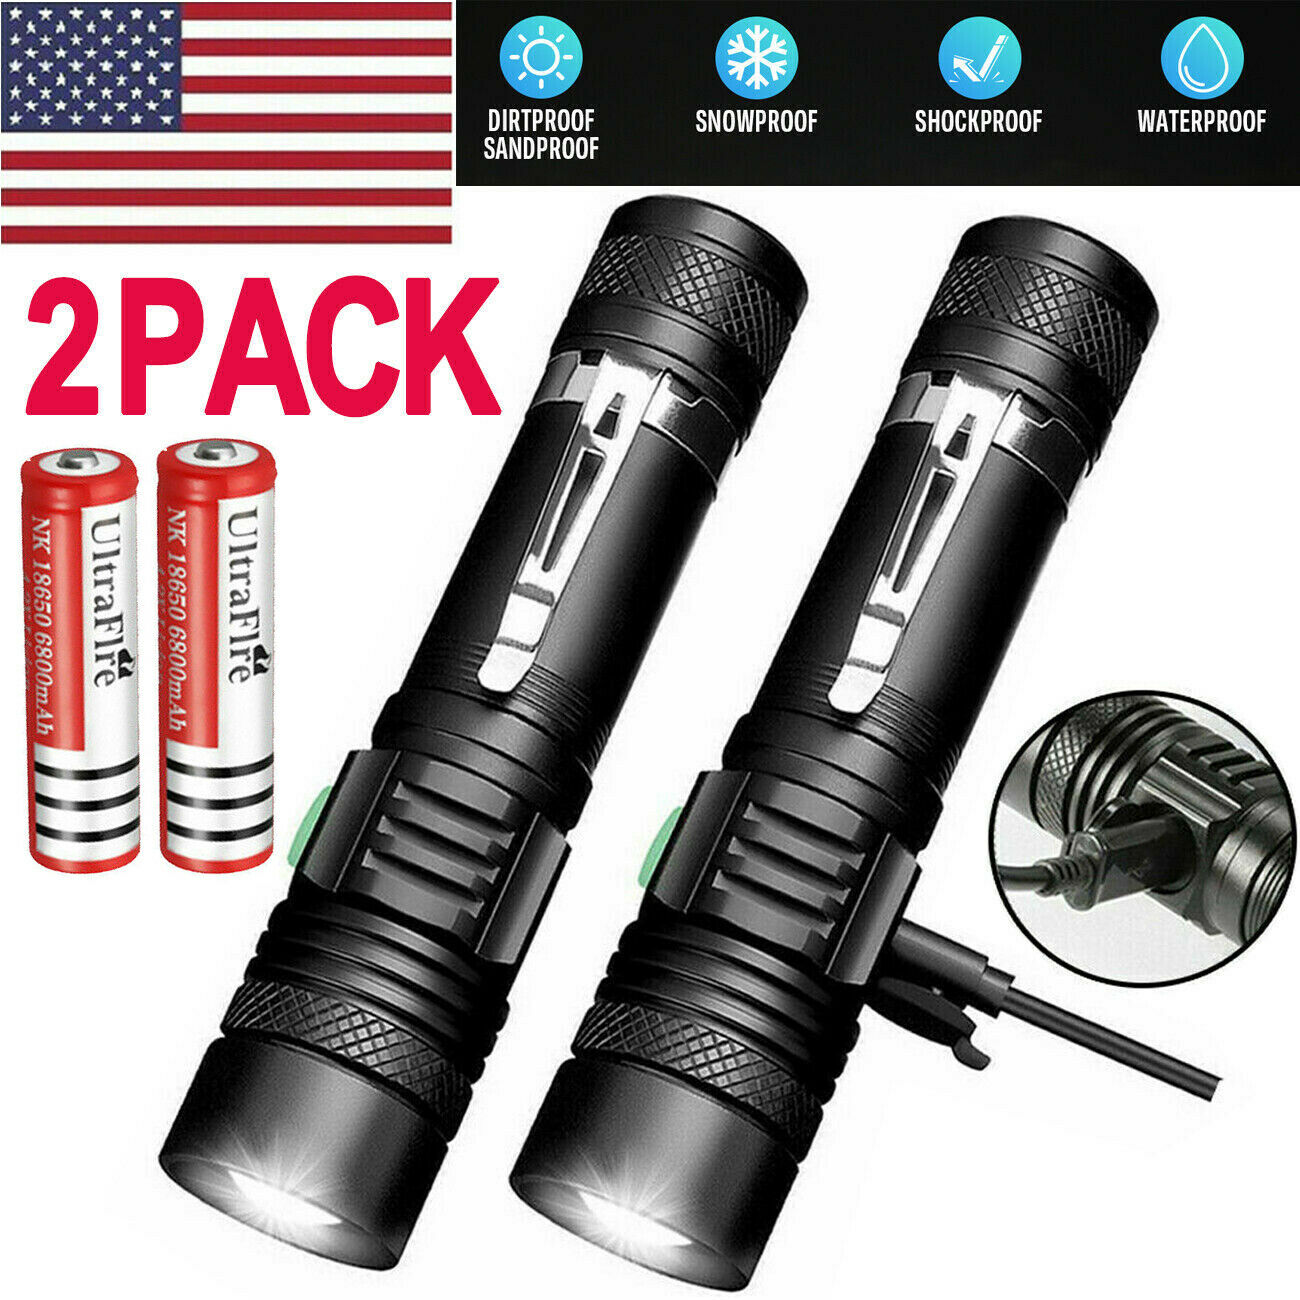 2 PACK 90000lm Flashlight 3Modes Rechargeable USB T6 LED Tactical Zoomable Torch